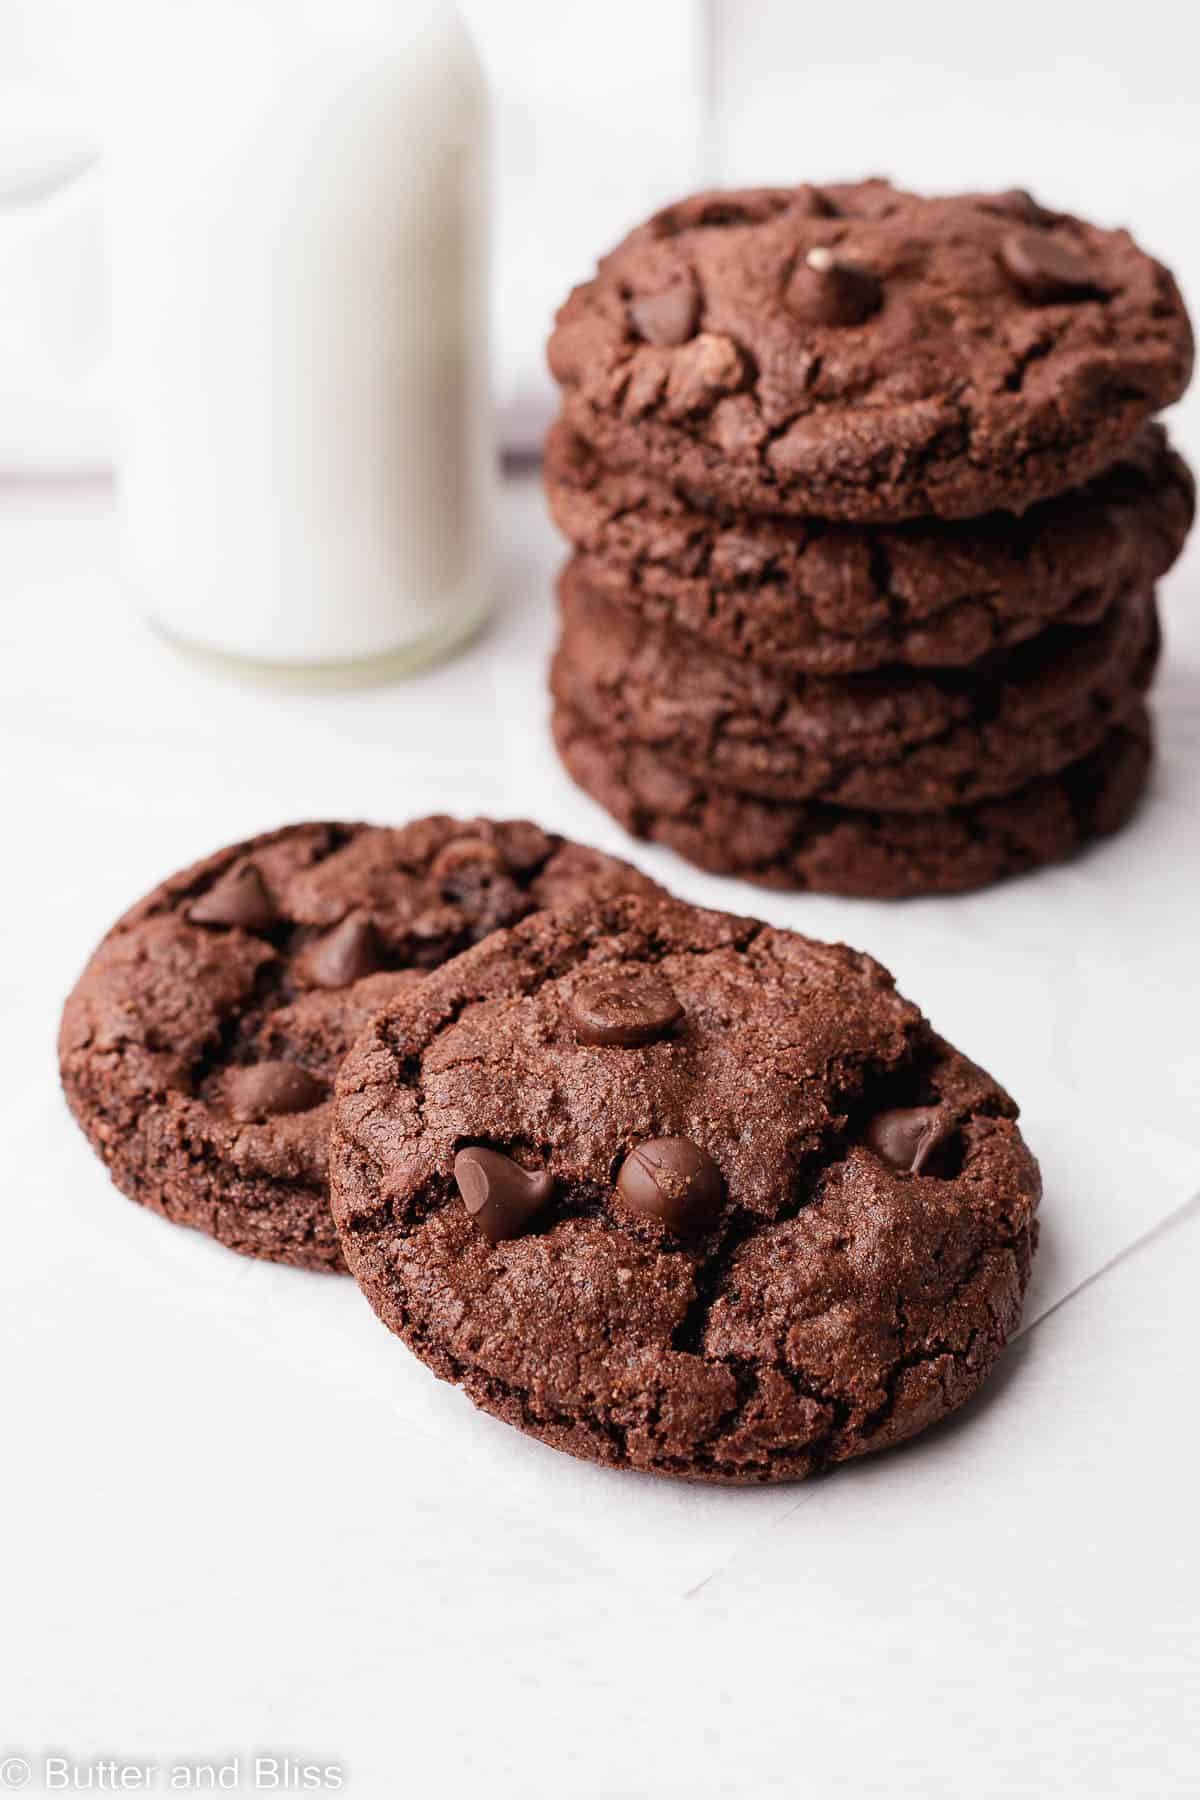 Two gluten free chocolate cookies stacked next to a glass of milk.